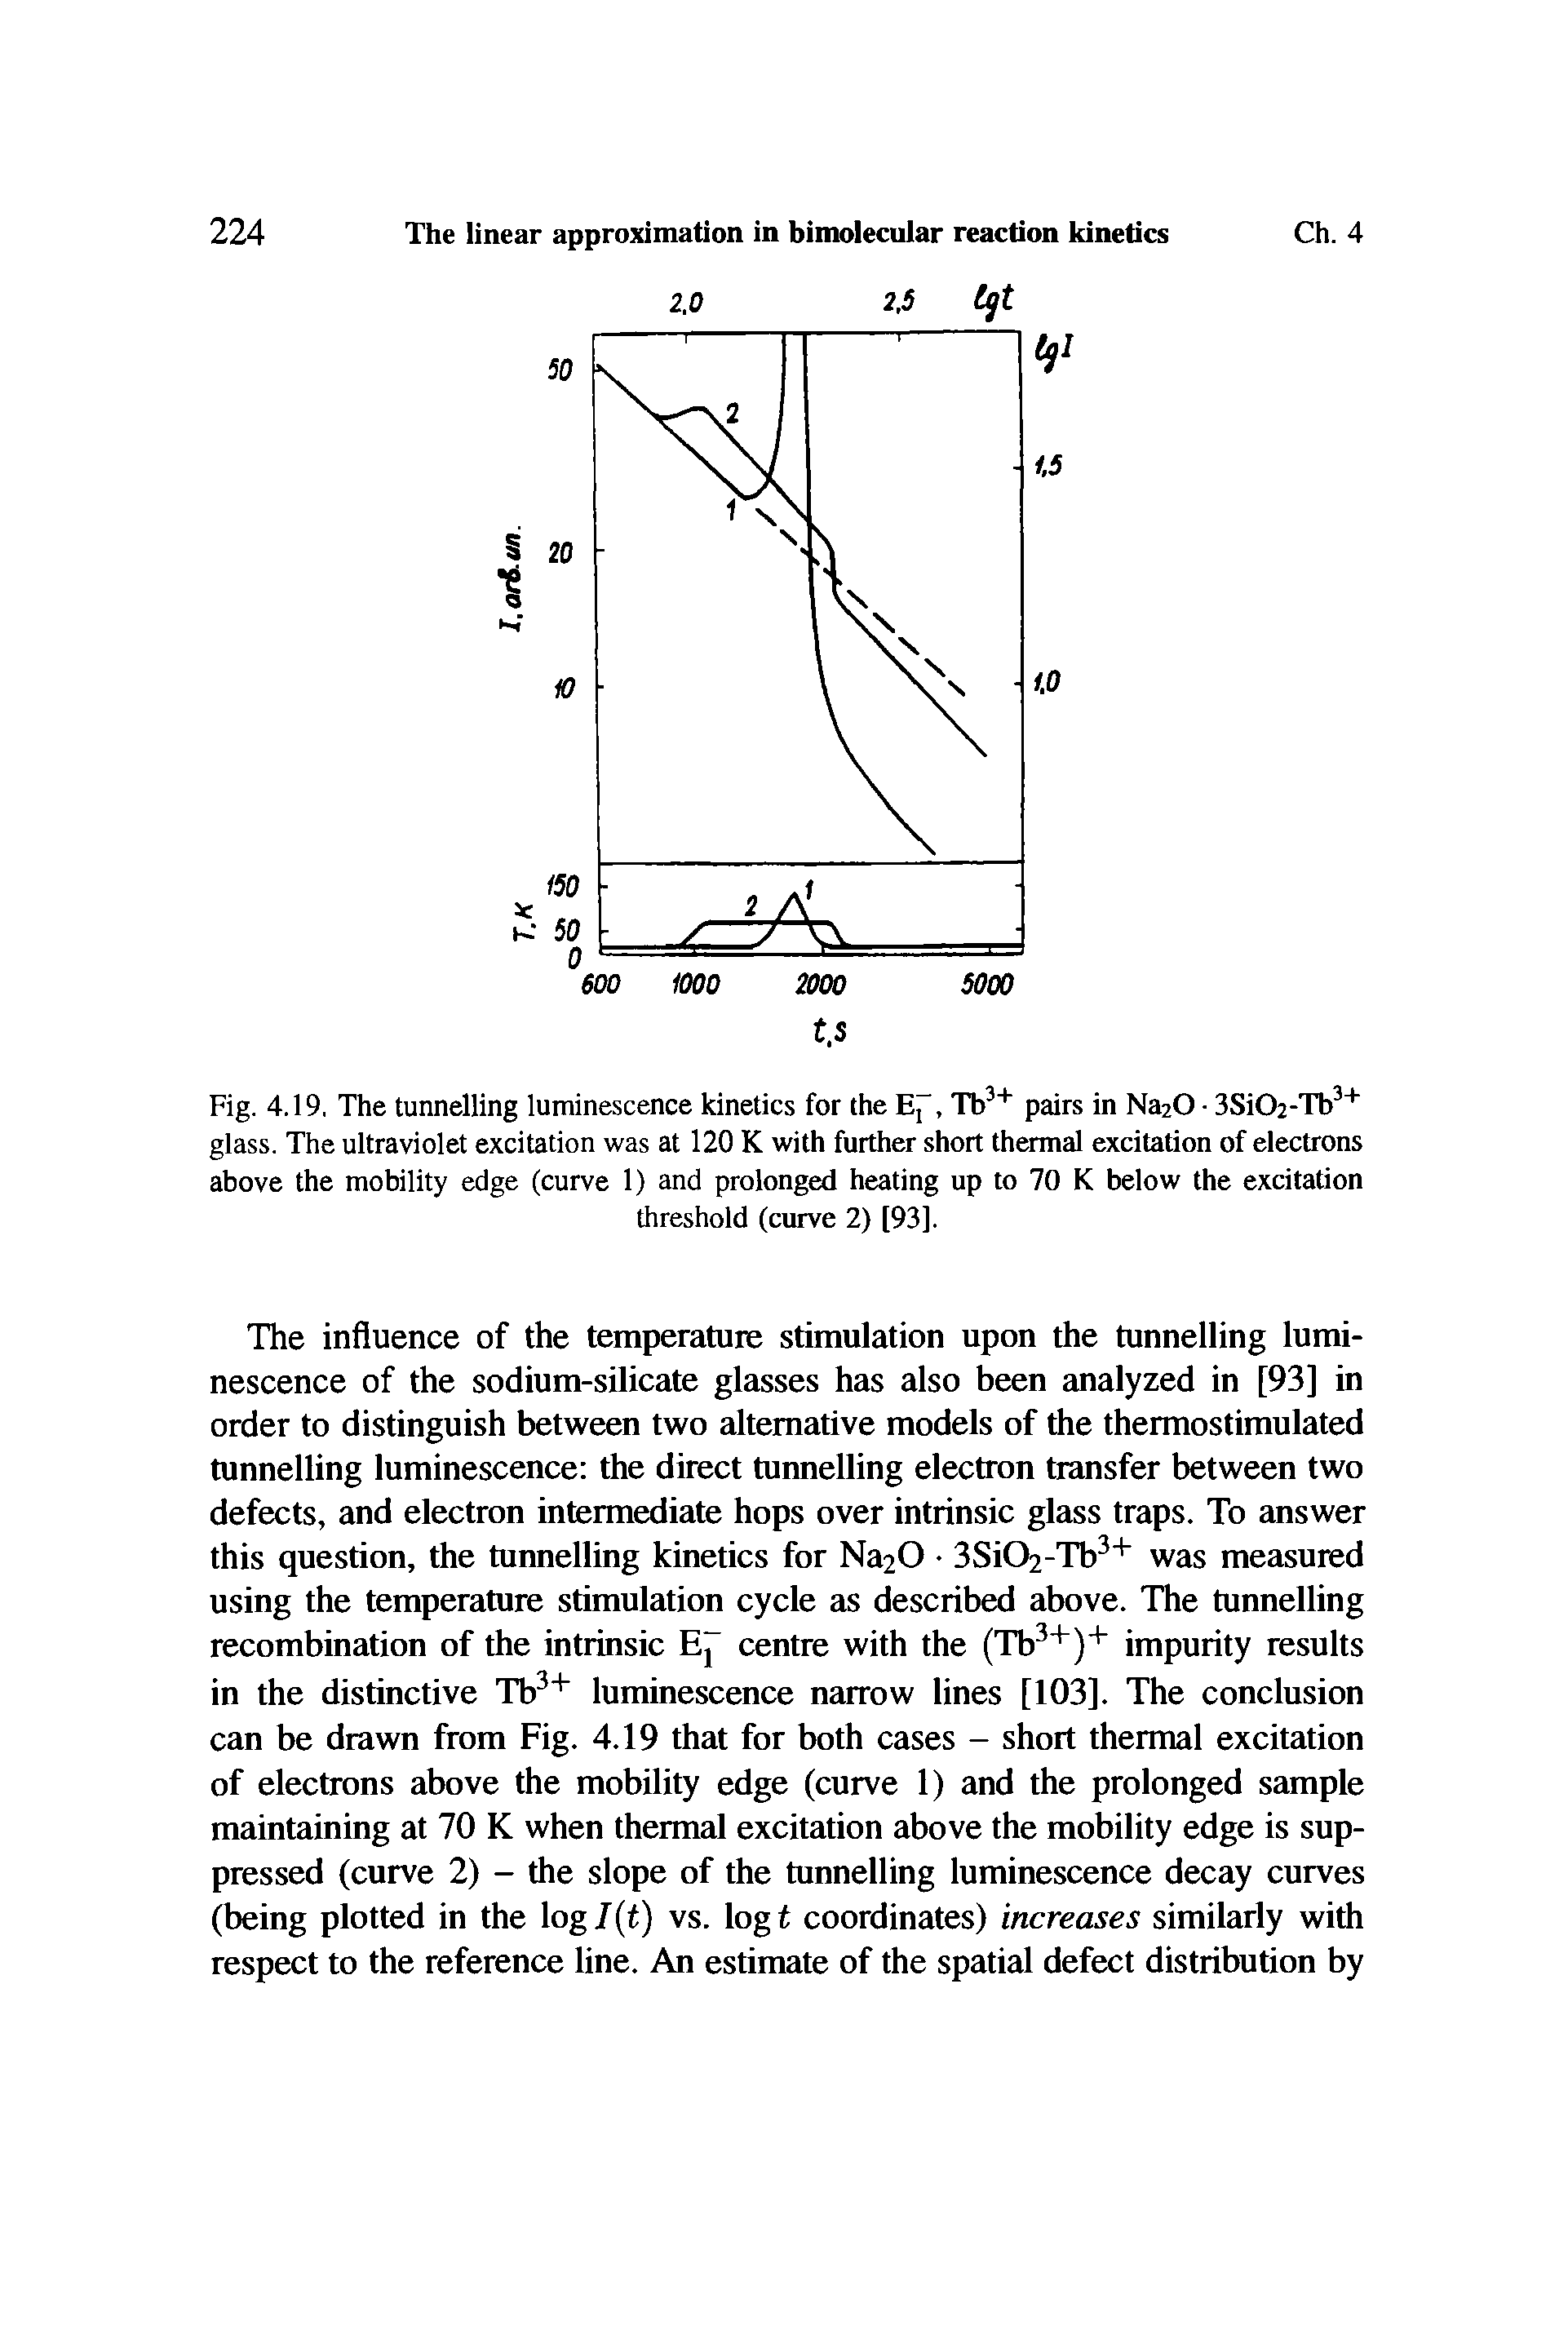 Fig. 4.19, The tunnelling luminescence kinetics for the Ej-, Tb3+ pairs in Na20 3Si02-Tb3+ glass. The ultraviolet excitation was at 120 K with further short thermal excitation of electrons above the mobility edge (curve 1) and prolonged heating up to 70 K below the excitation...